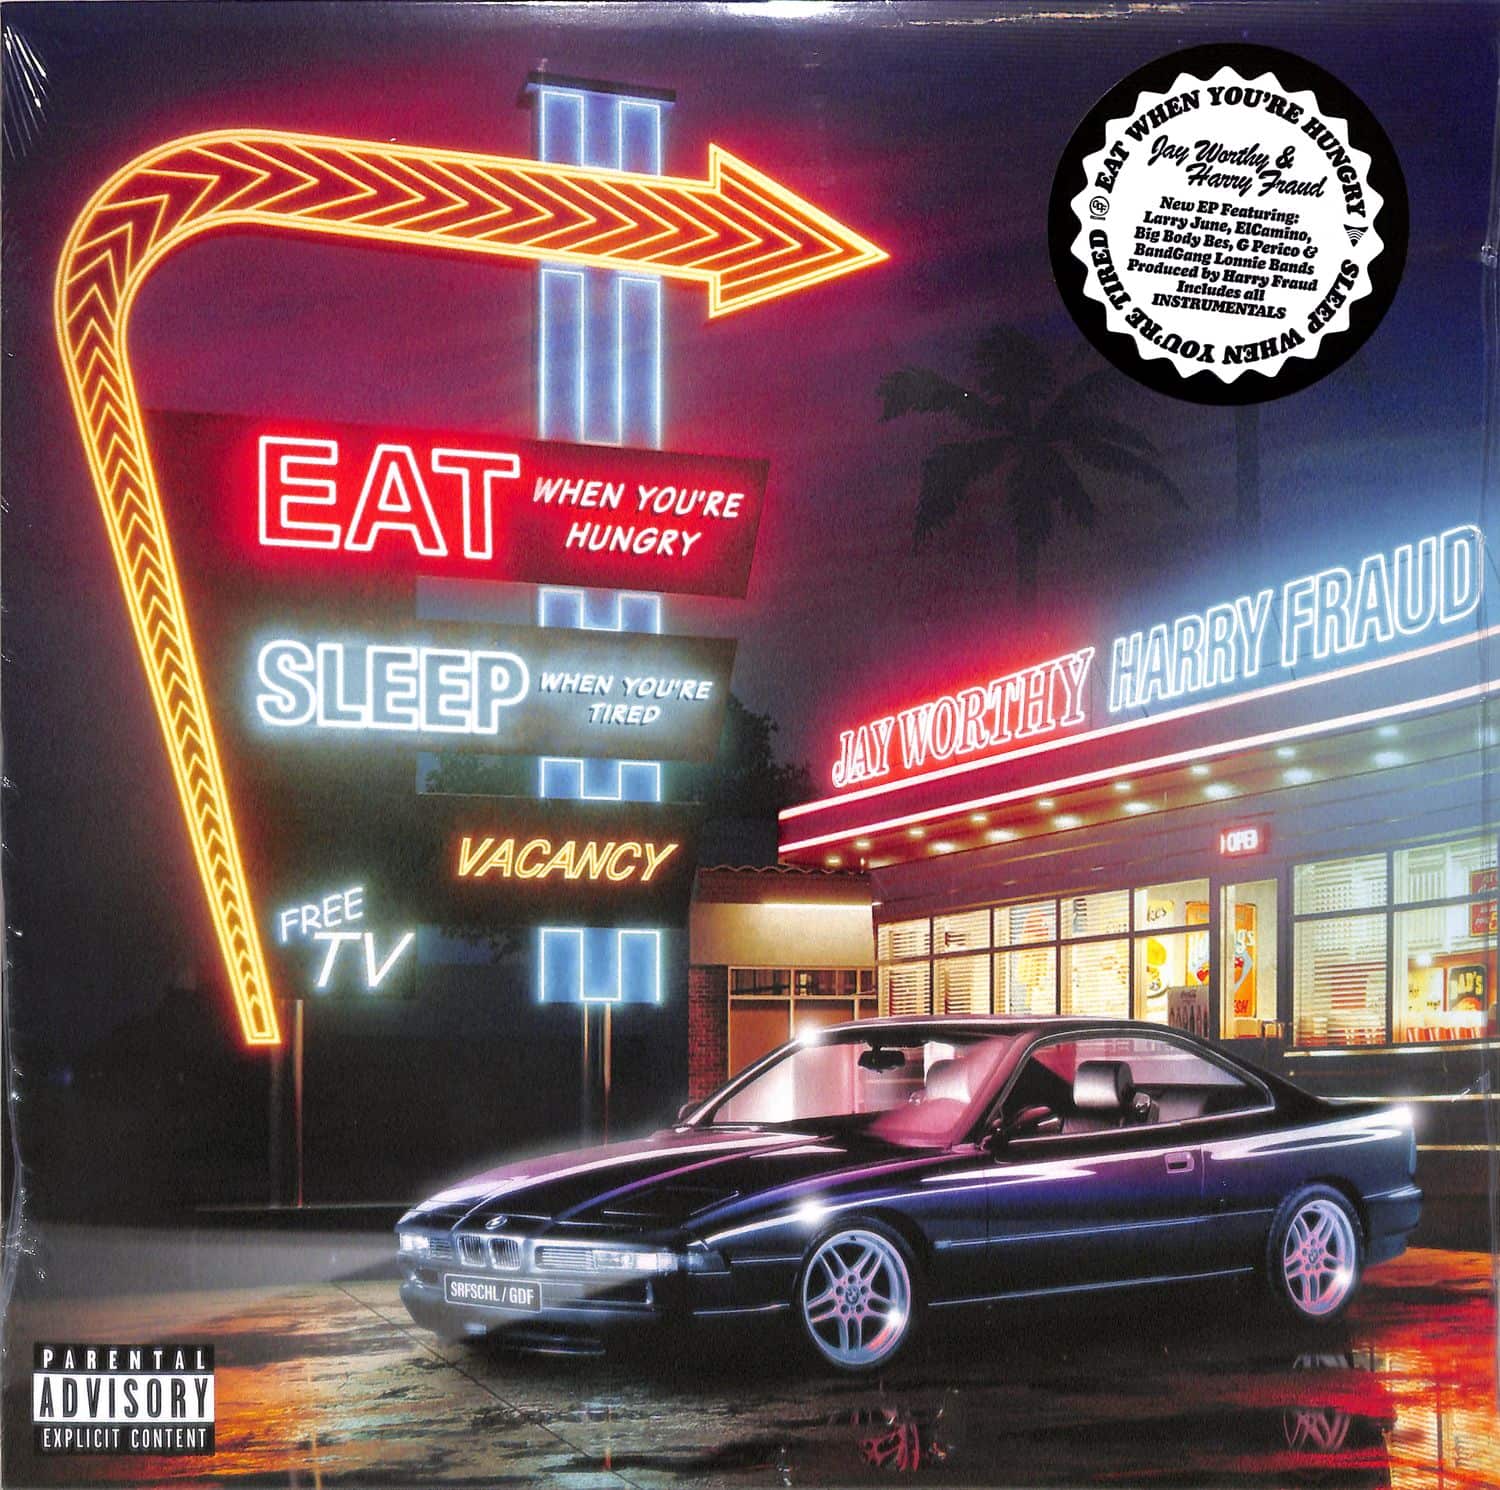 Jay Worthy & Harry Fraud - EAT WHEN YOU RE HUNGRY SLEEP WHEN YOU RE TIRED 